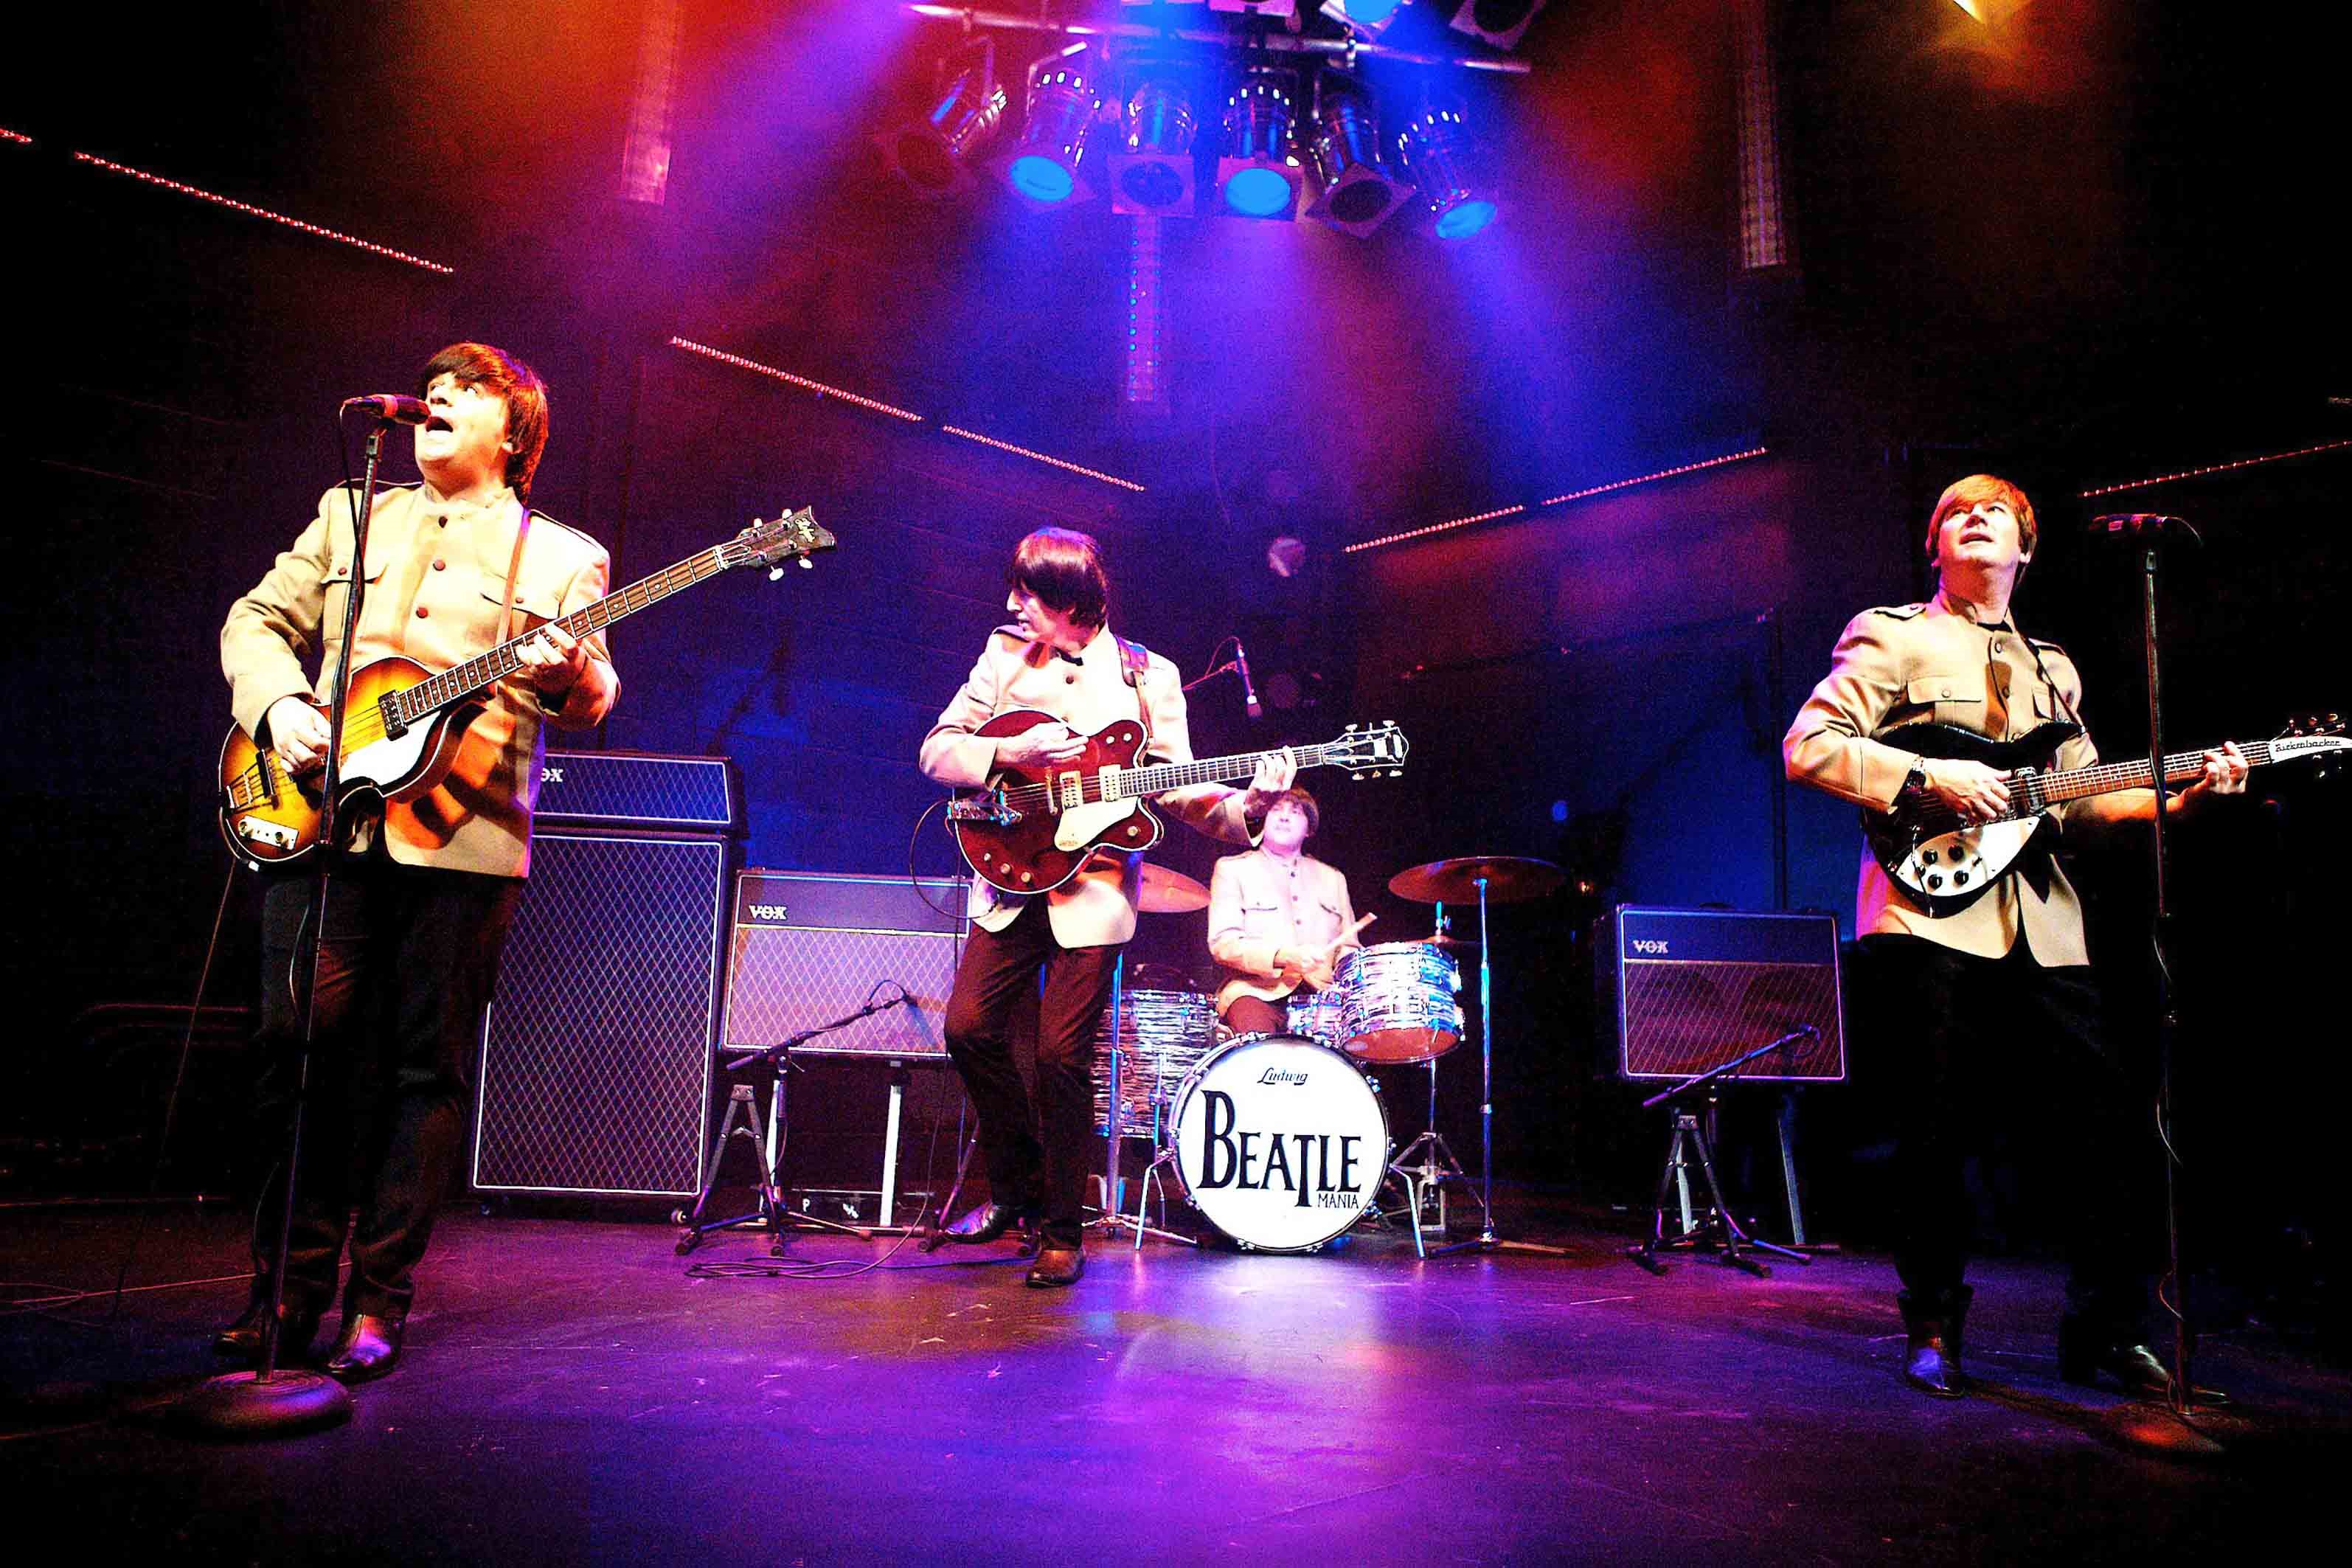 Mop top to psychedelic highs – Come and see Beatlemania